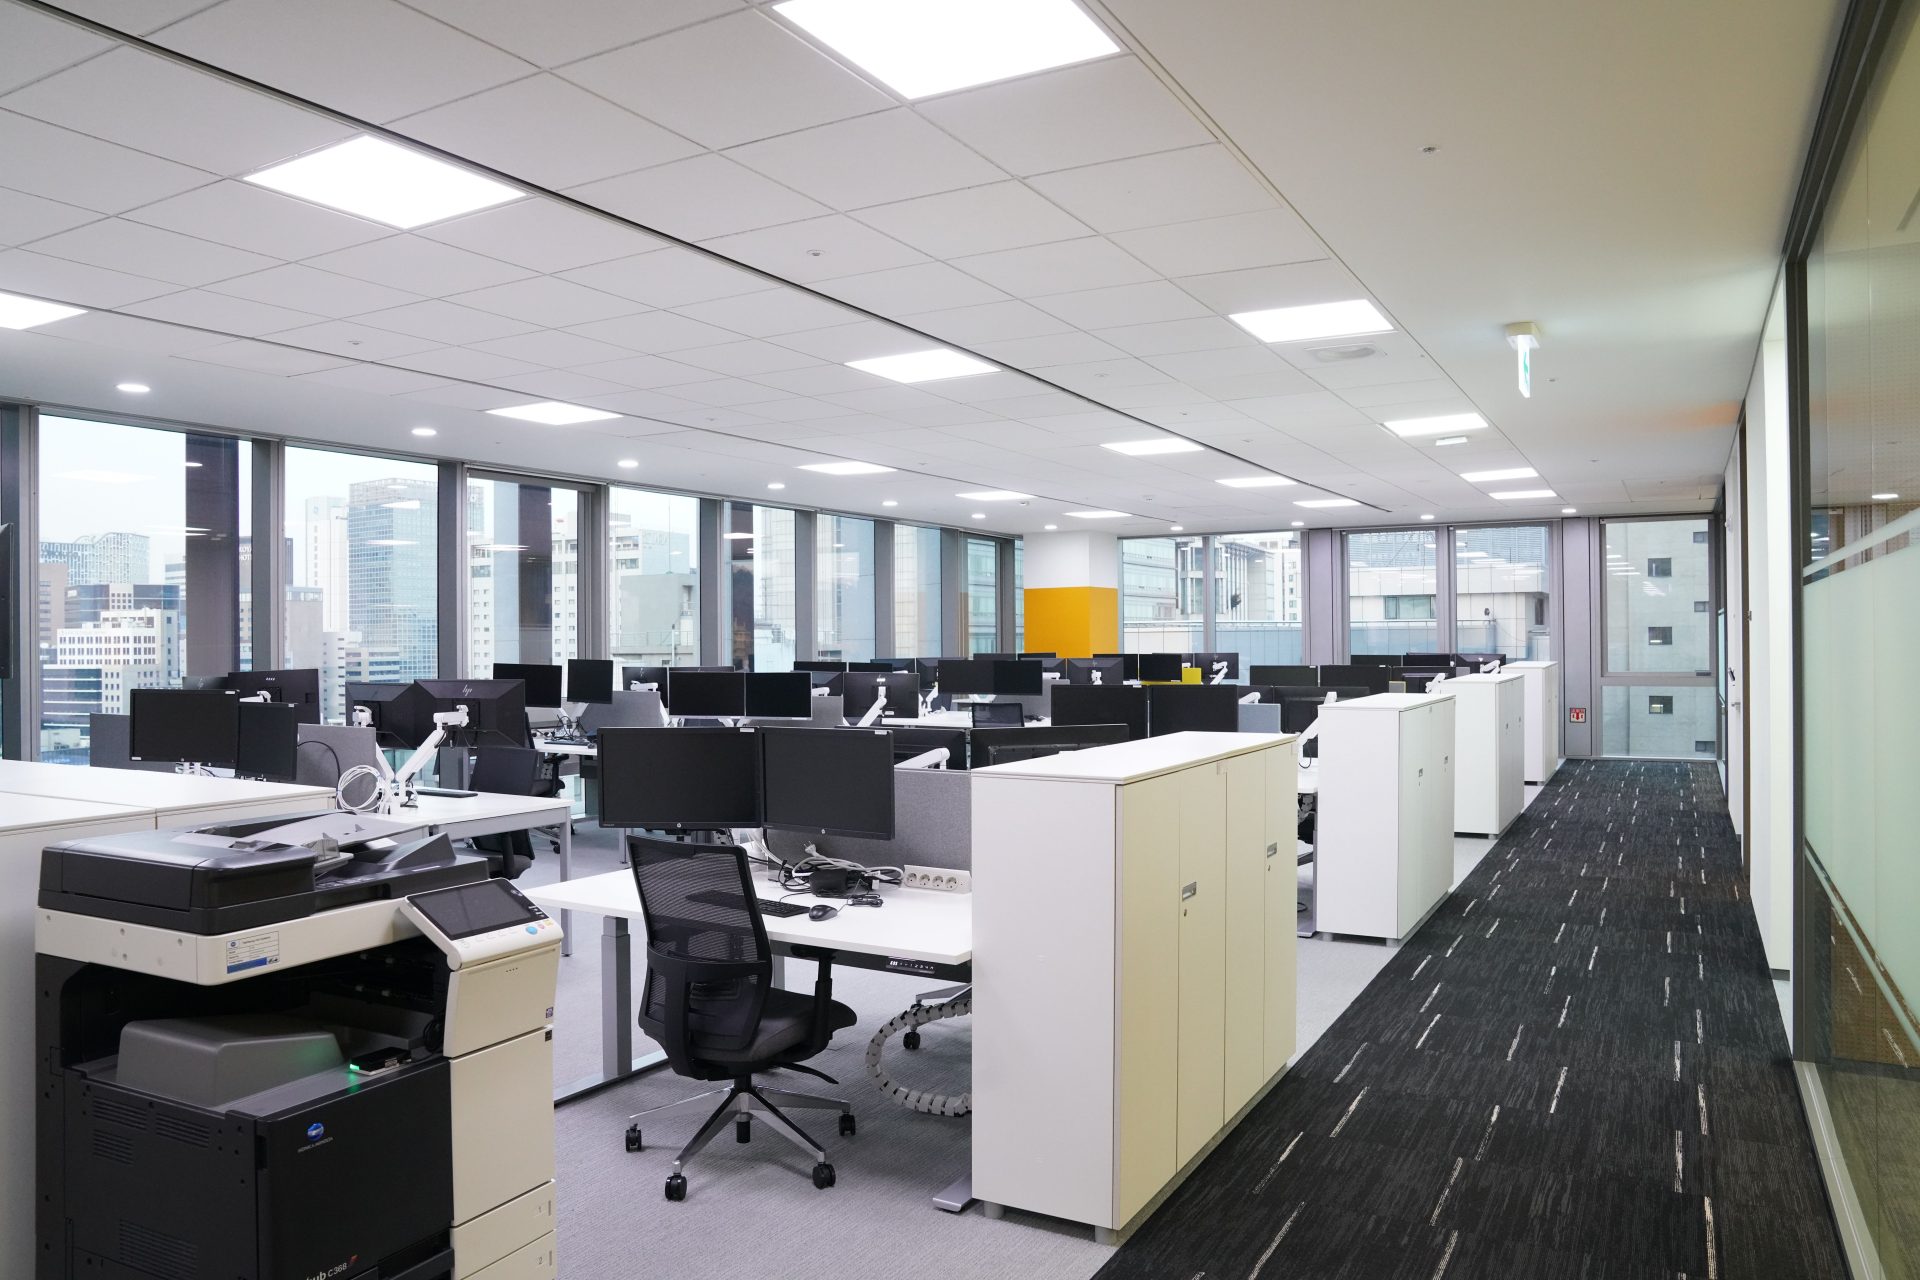 The image shows the office area at BMW Group Korea,